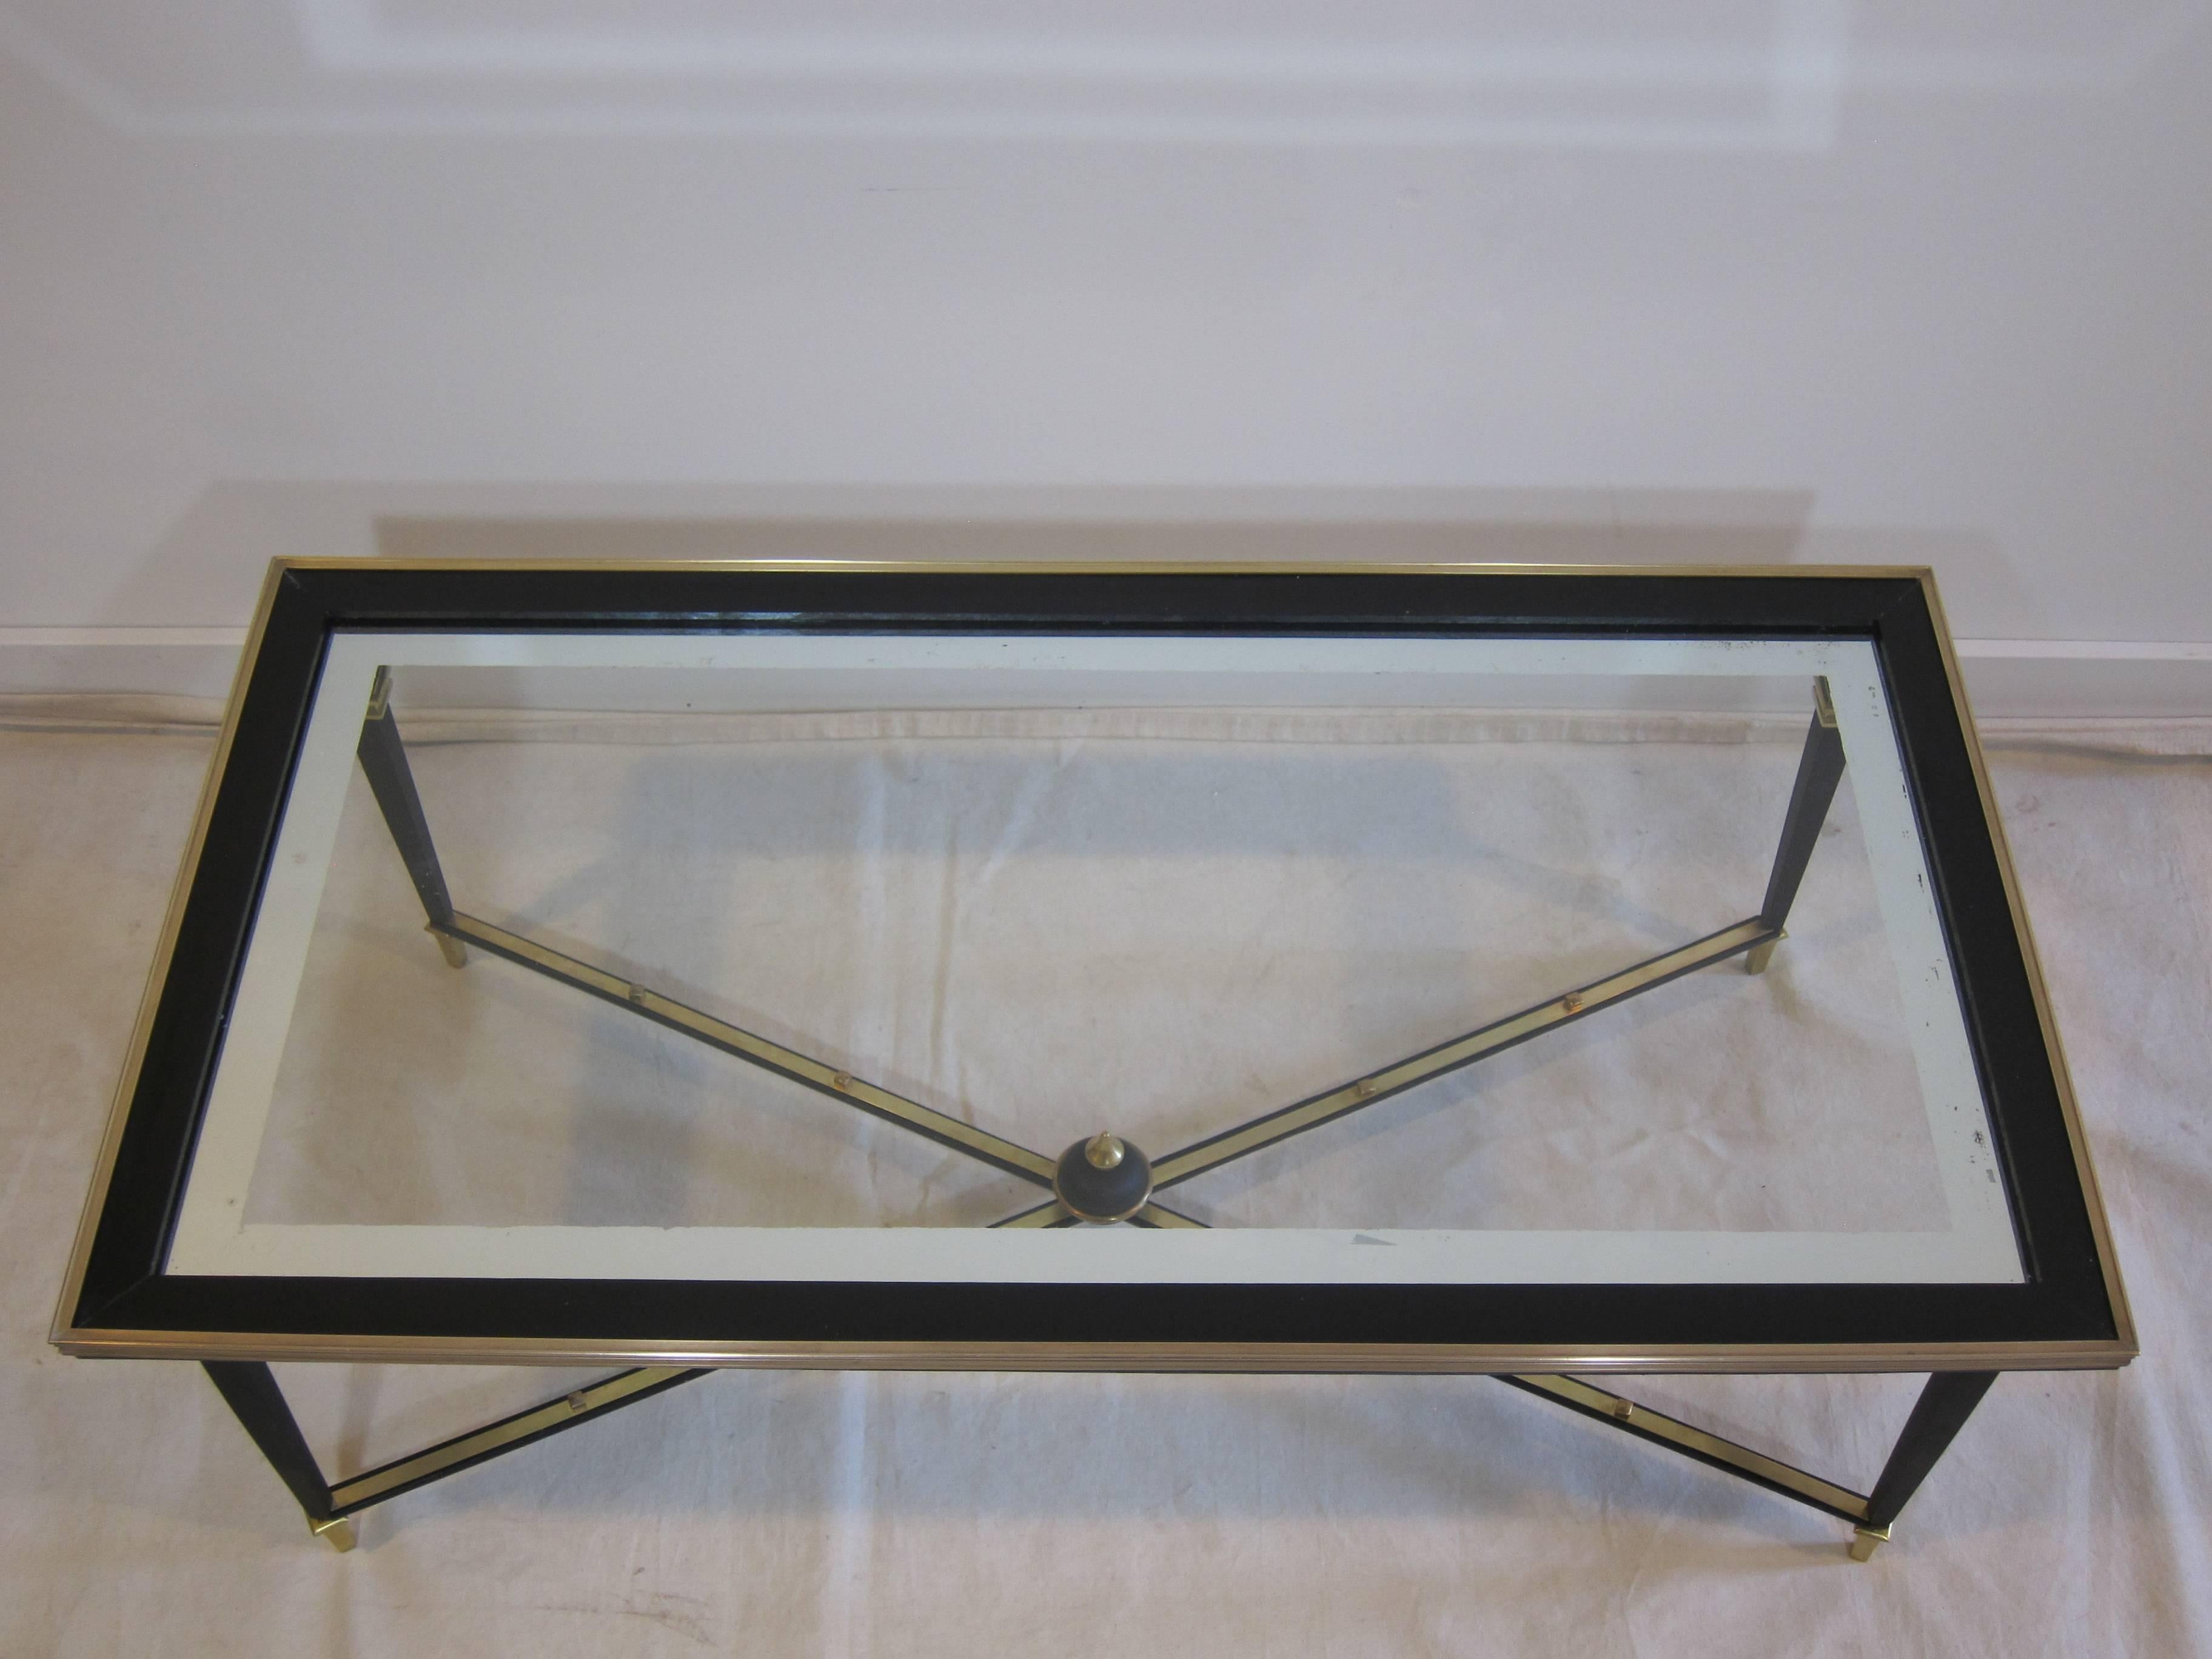 French glass cocktail table in the style of Maison Jansen. Having brass frame with wood frame around a glass top with mirrored border, brass studded struts with brass details. The mirrored silver border has some wear pictured, minimal scratch to the